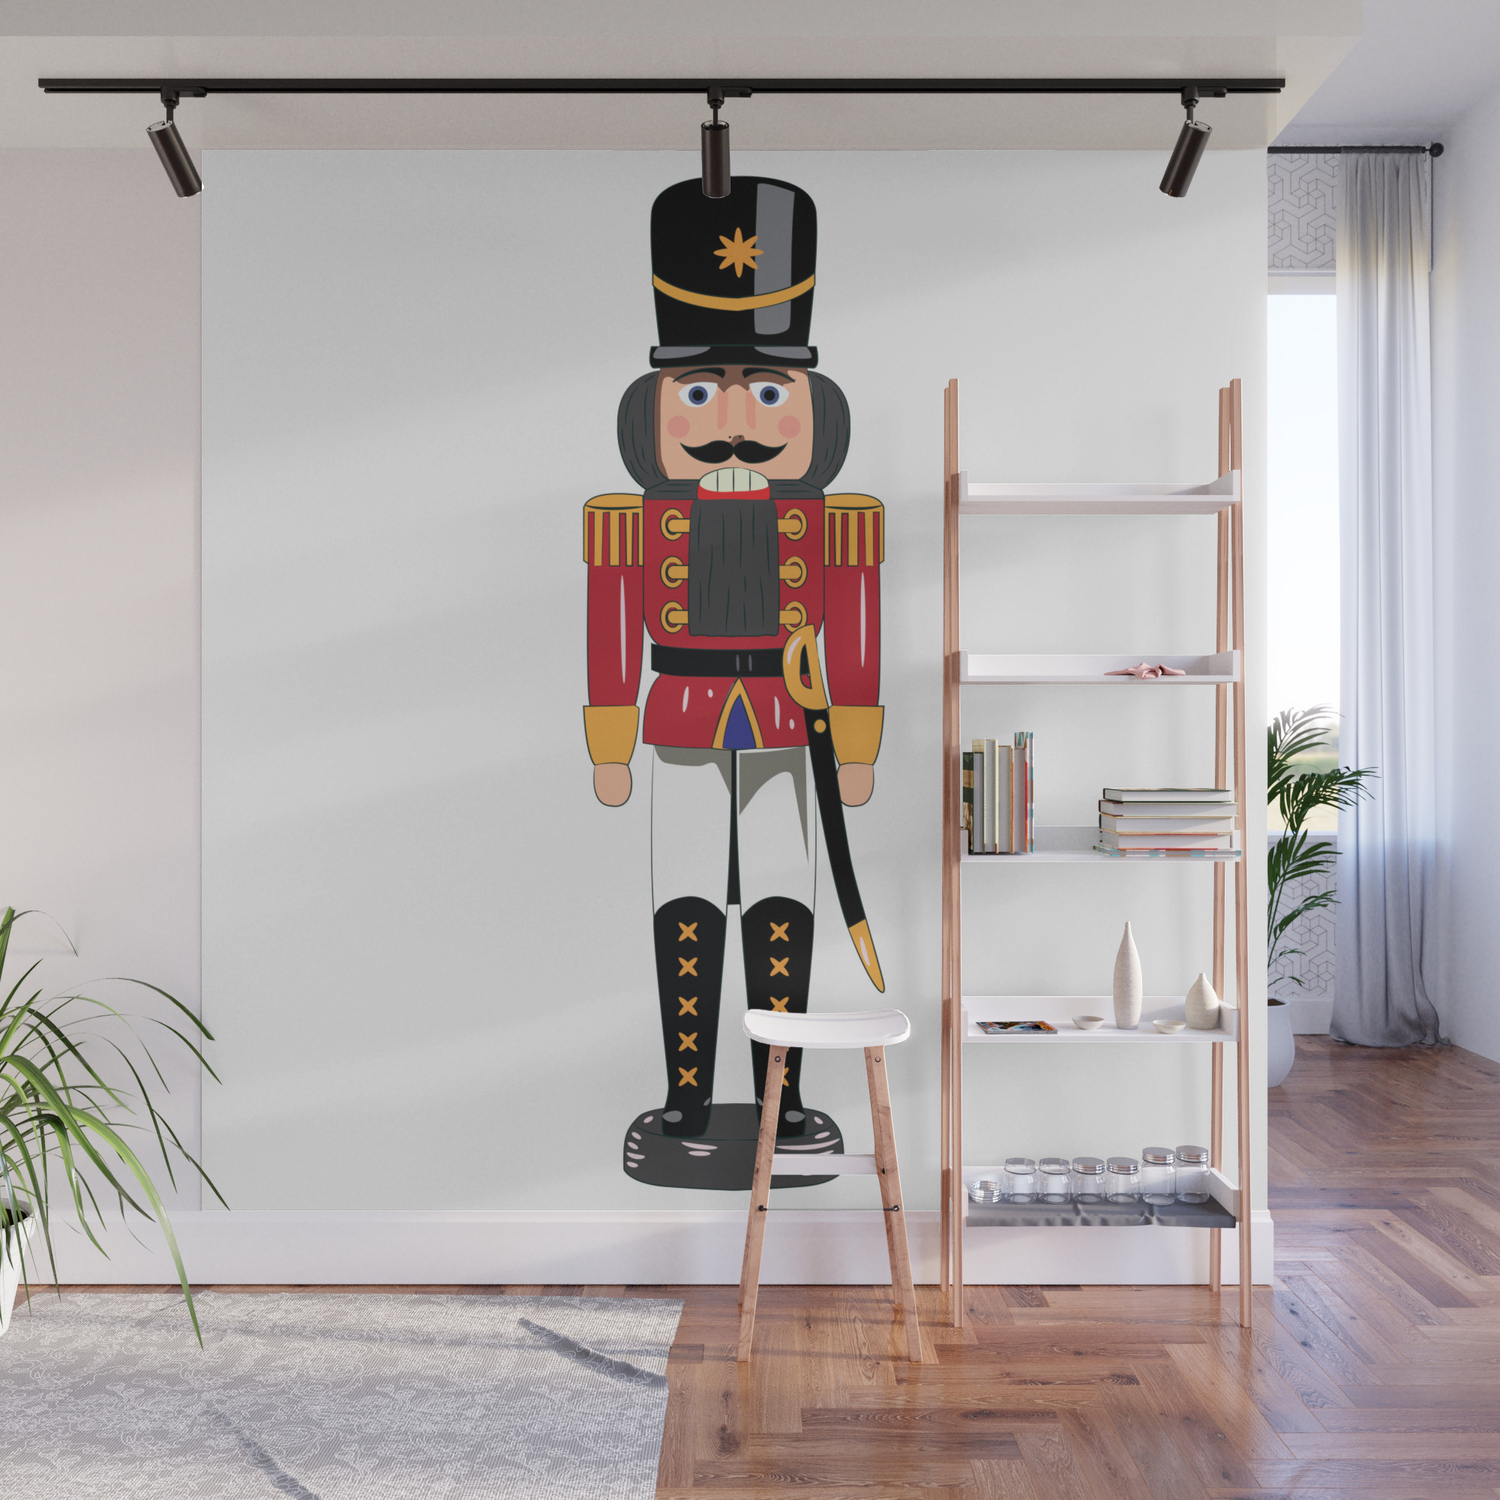 images of nutcracker soldier